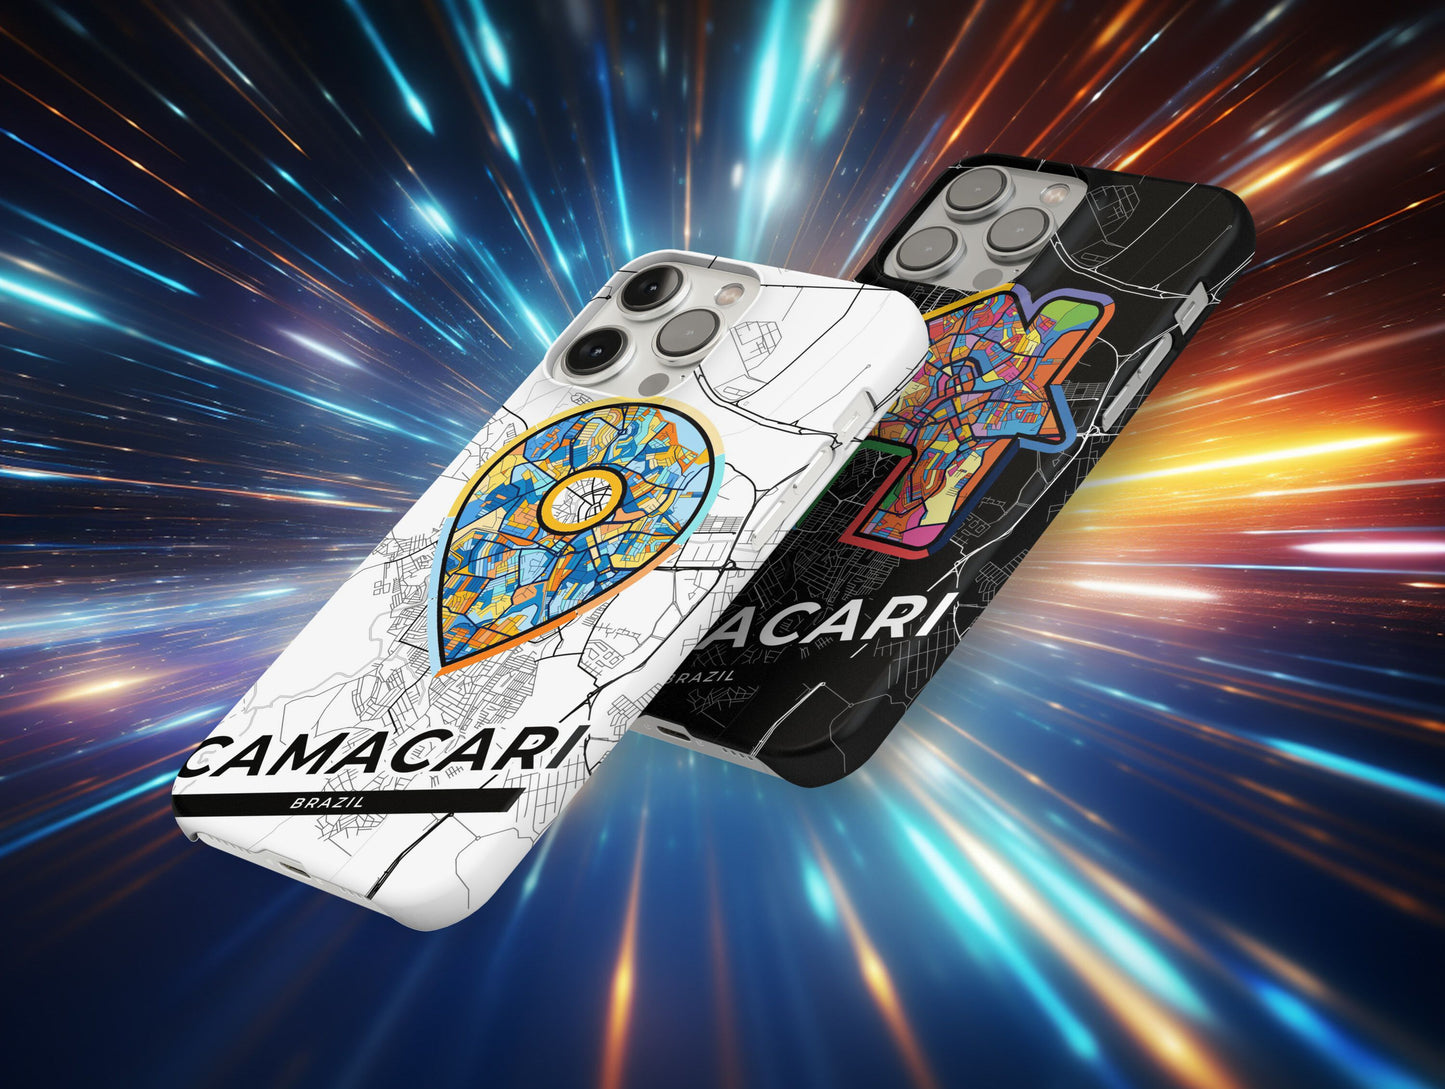 Camacari Brazil slim phone case with colorful icon. Birthday, wedding or housewarming gift. Couple match cases.